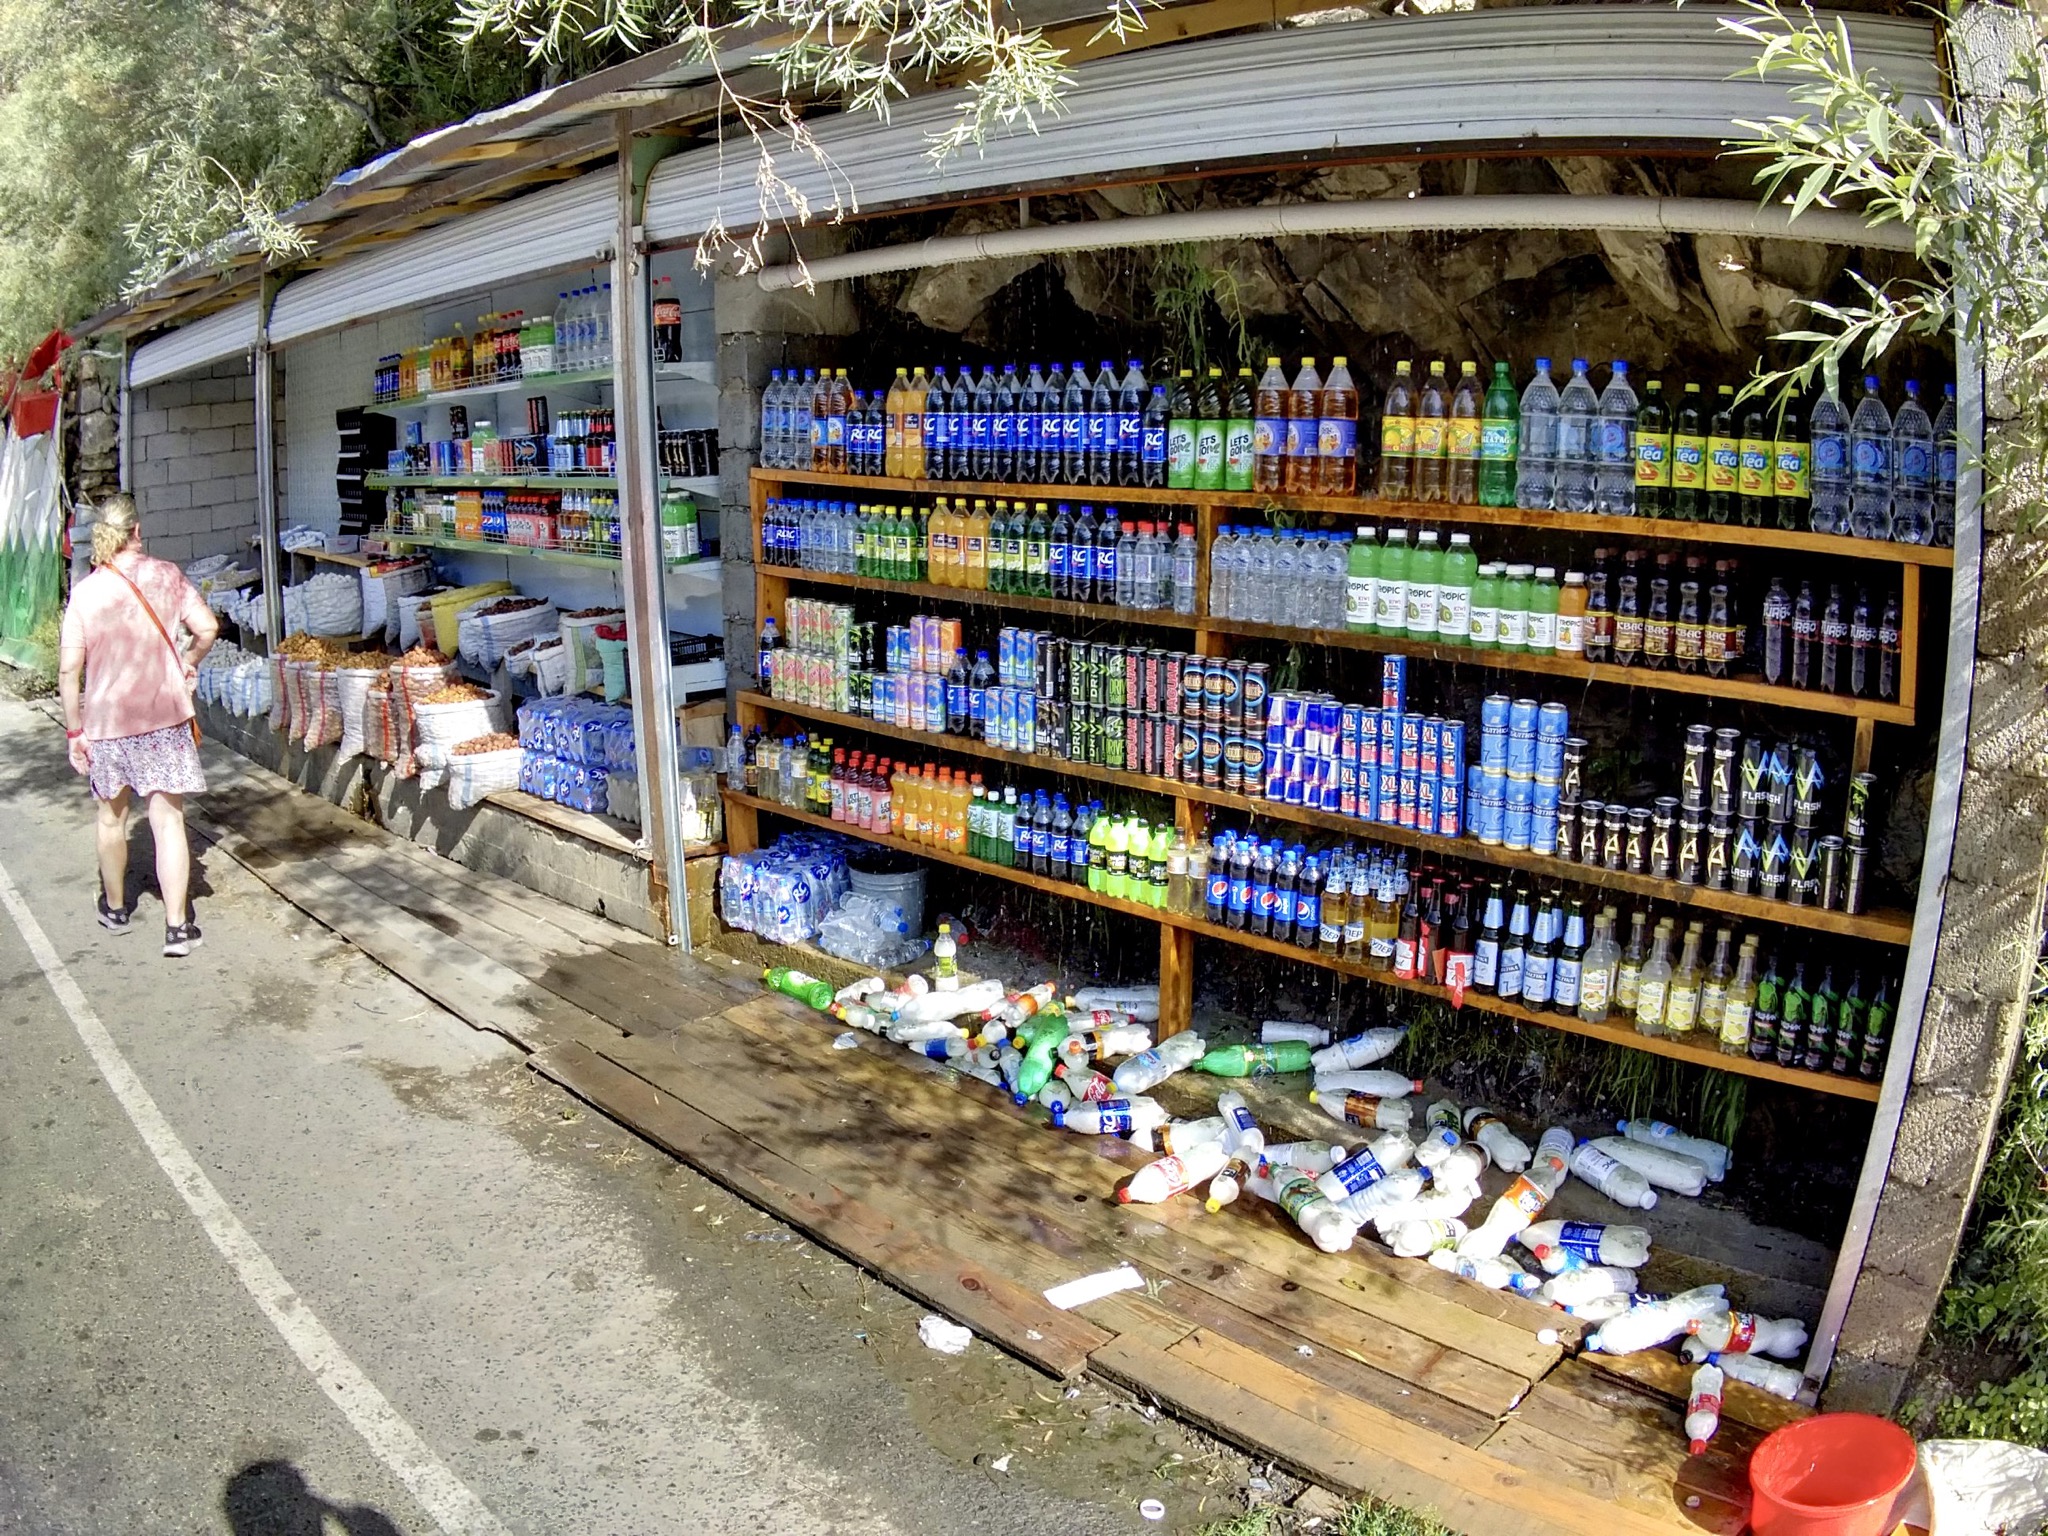 A roadside stand selling drinks